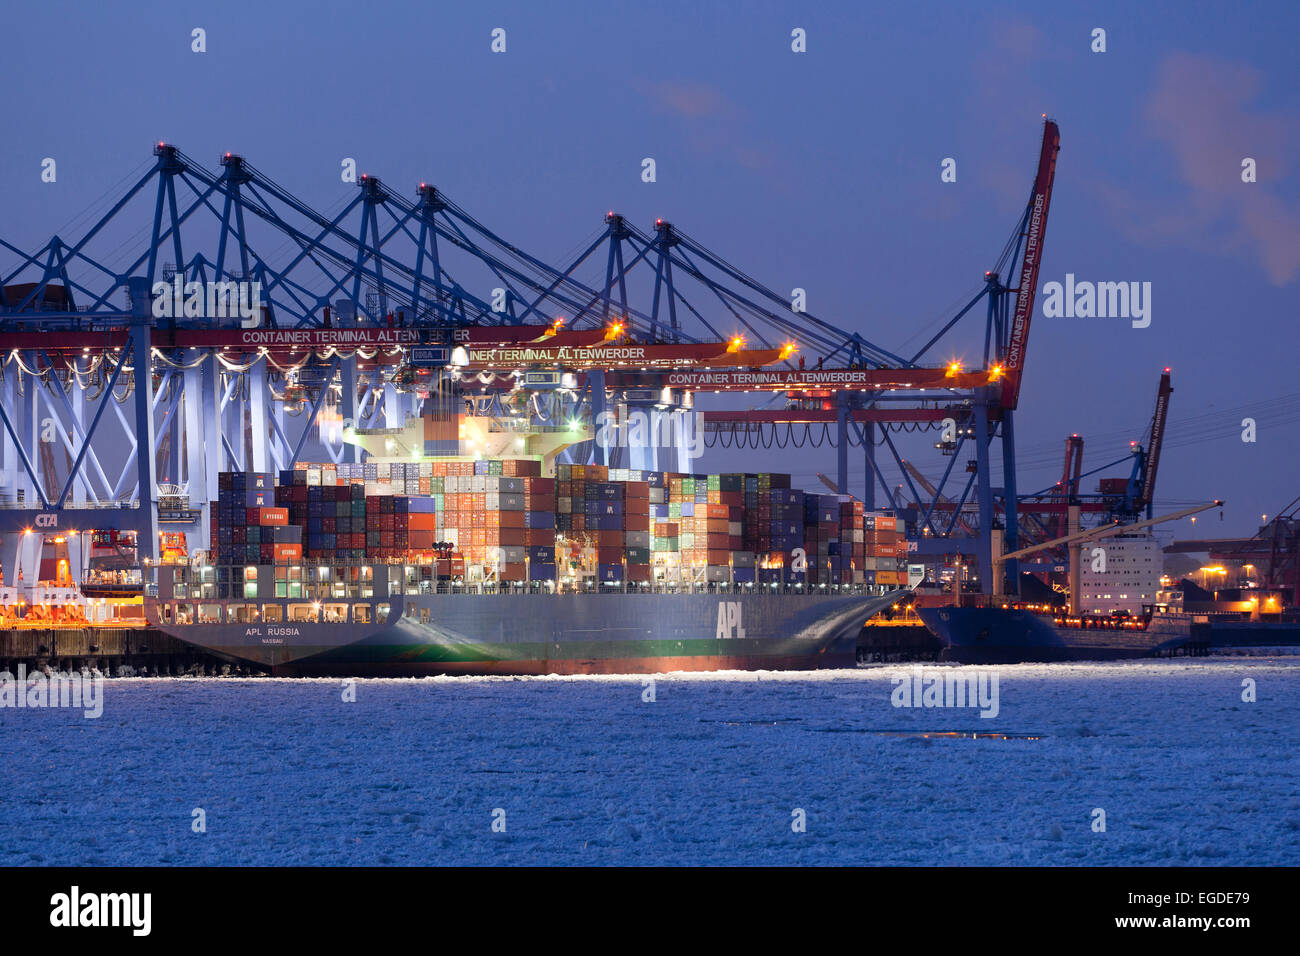 Container ship in front of a container bridge in winter, Altenwerder, Hamburg, Germany Stock Photo